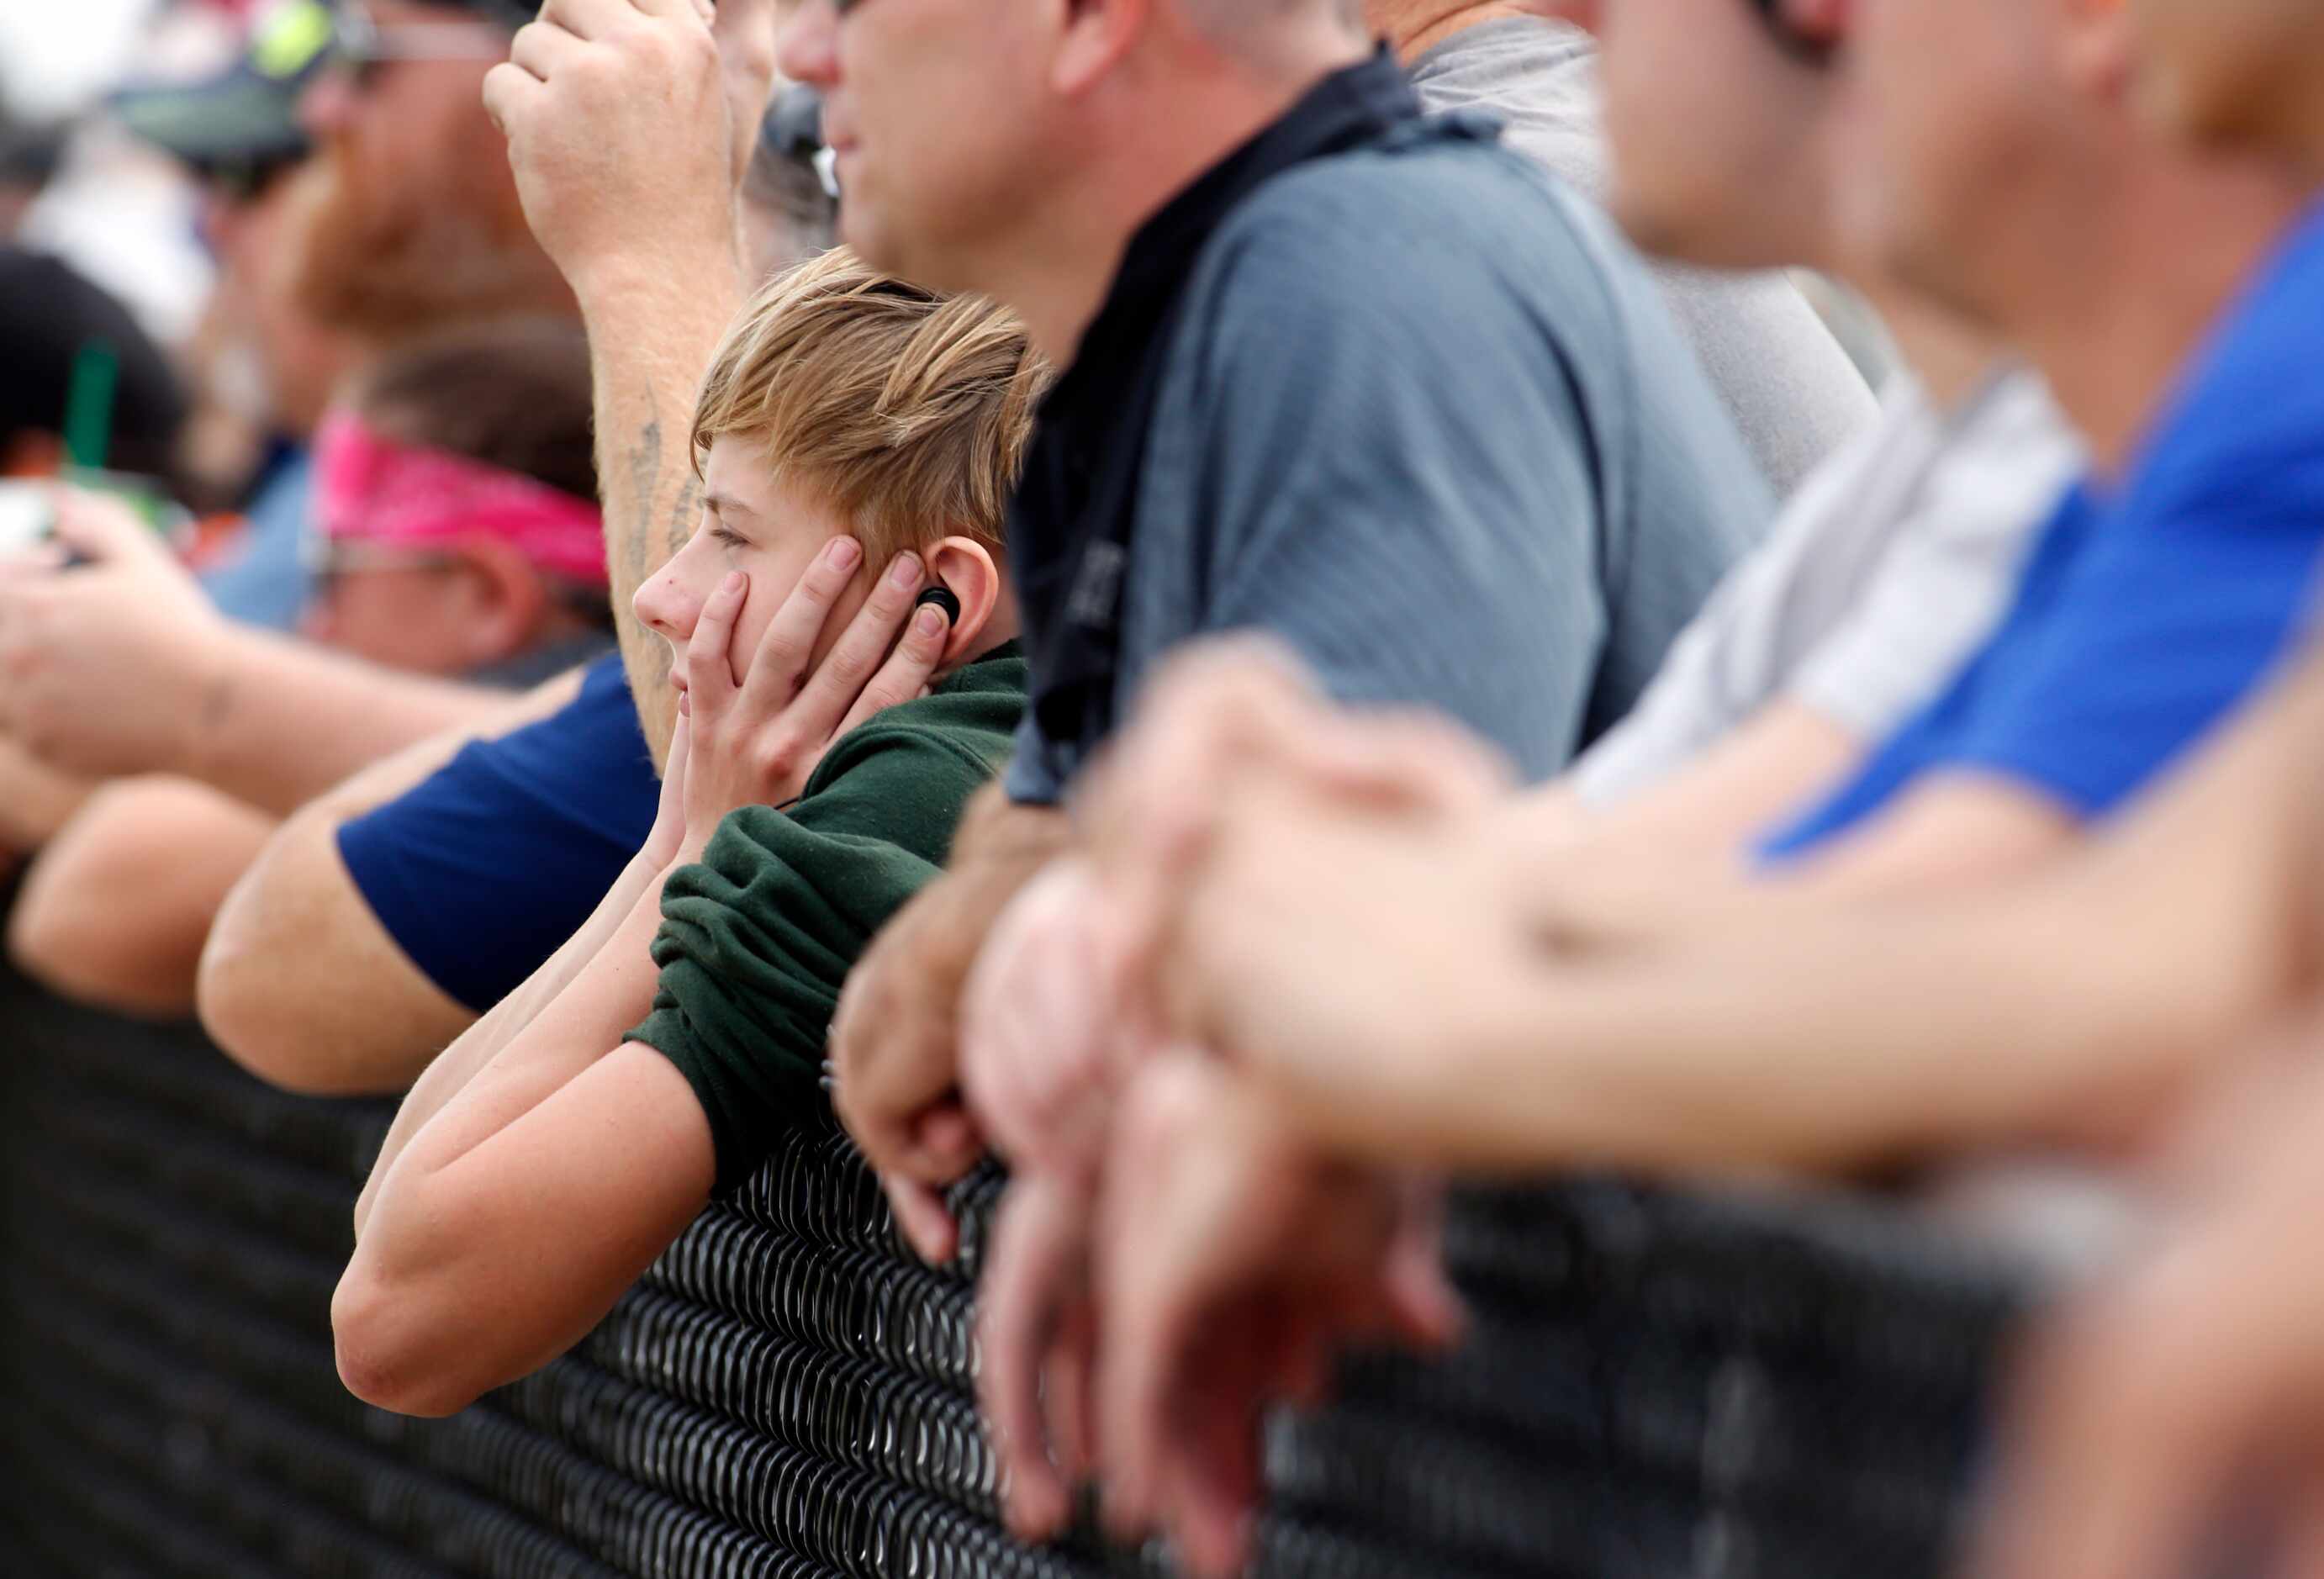 Zaithen Watkins guards his ears as racing fans look on at the start of a race in the funny...